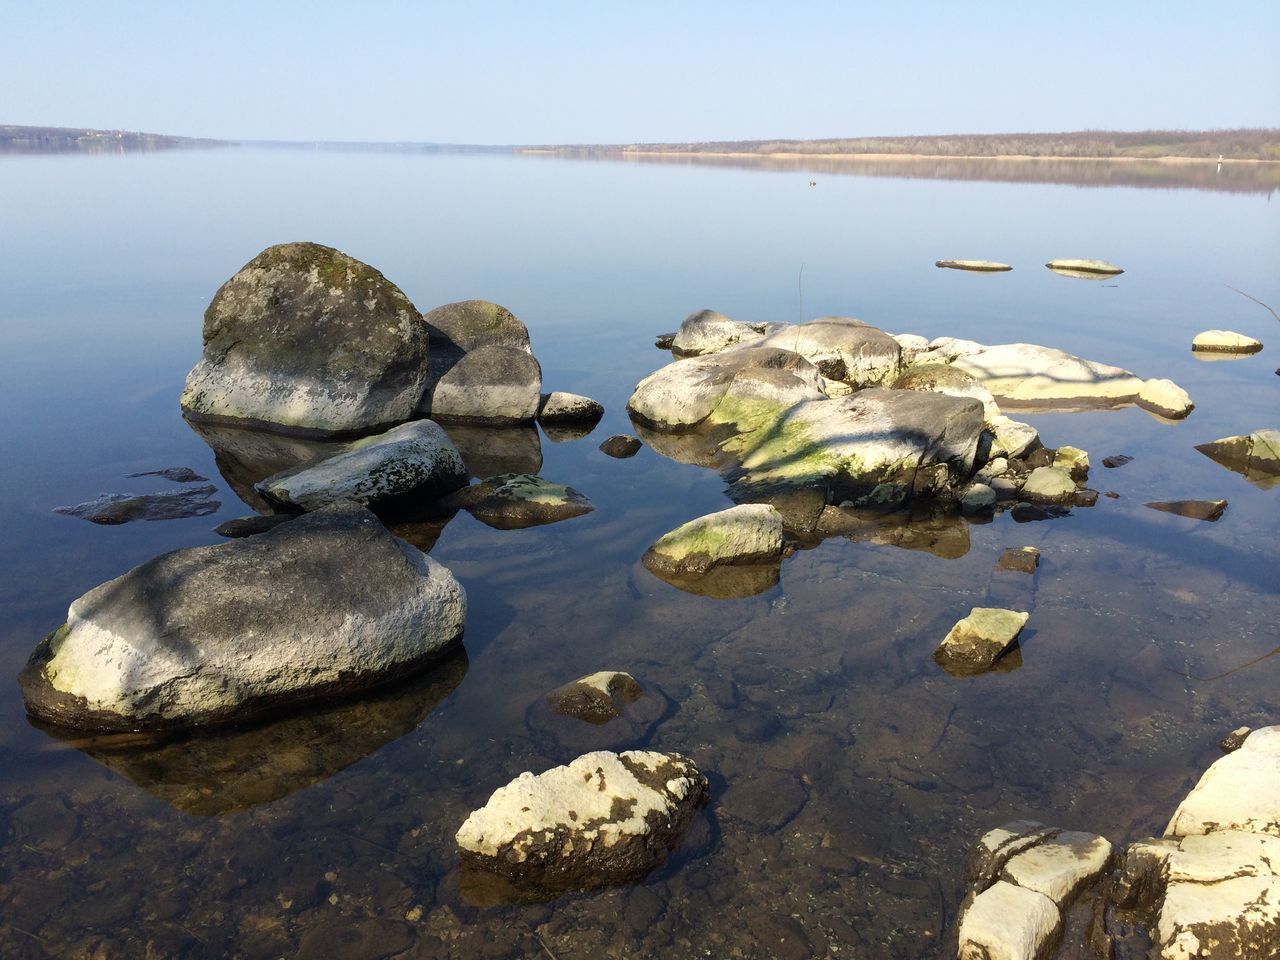 water, rock - object, tranquility, tranquil scene, sea, reflection, nature, stone - object, stone, rock, scenics, lake, nautical vessel, transportation, beauty in nature, day, clear sky, calm, outdoors, boat